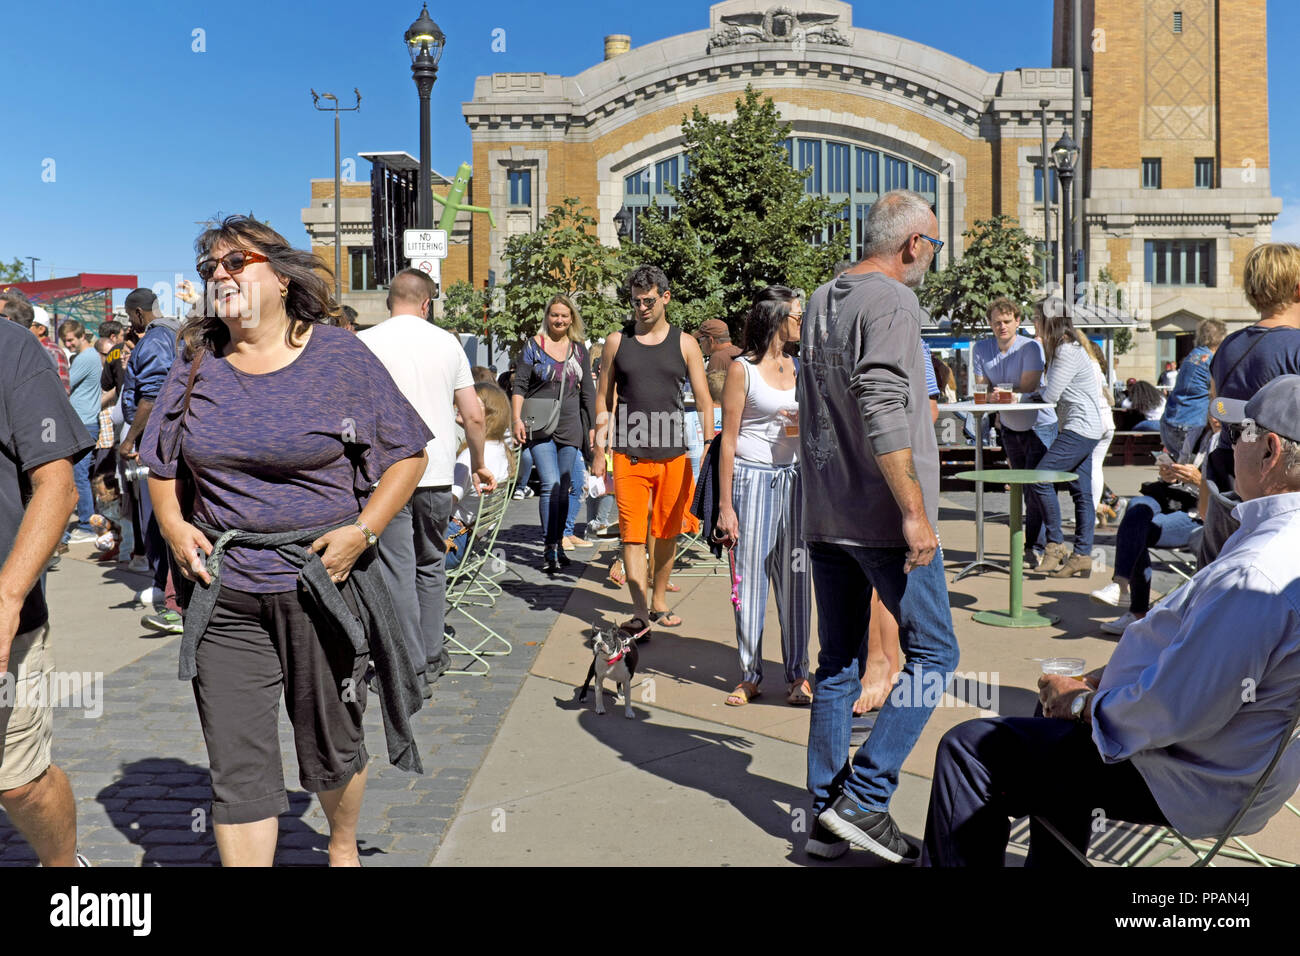 Clevelanders enjoy early fall sunshine in Market Square across from the West Side Market during the annual Ohio City Street Fair. Stock Photo